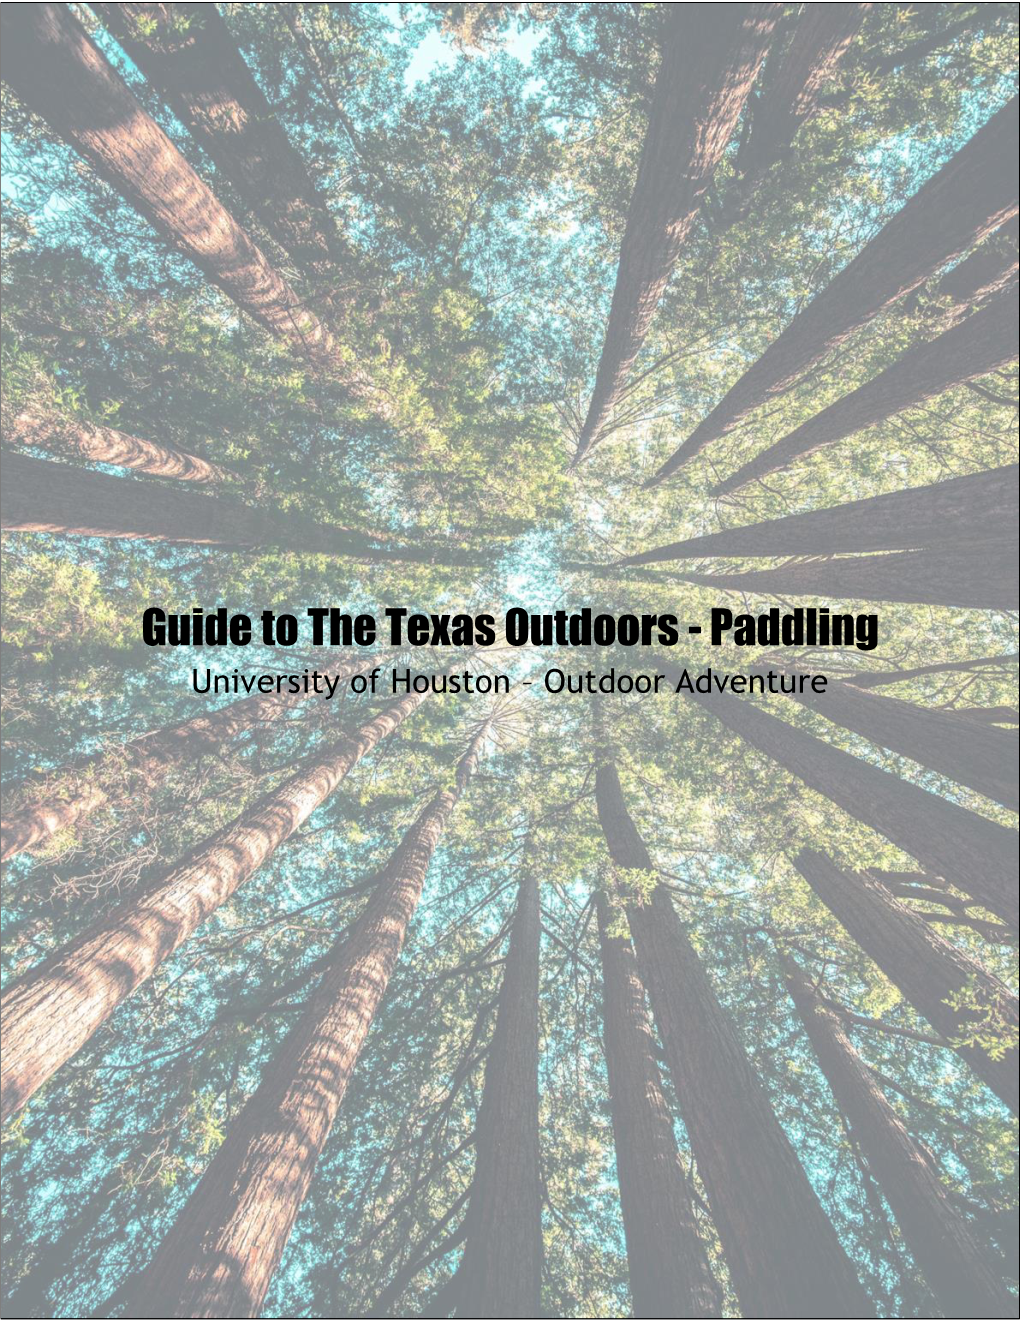 Guide to the Texas Outdoors - Paddling University of Houston – Outdoor Adventure